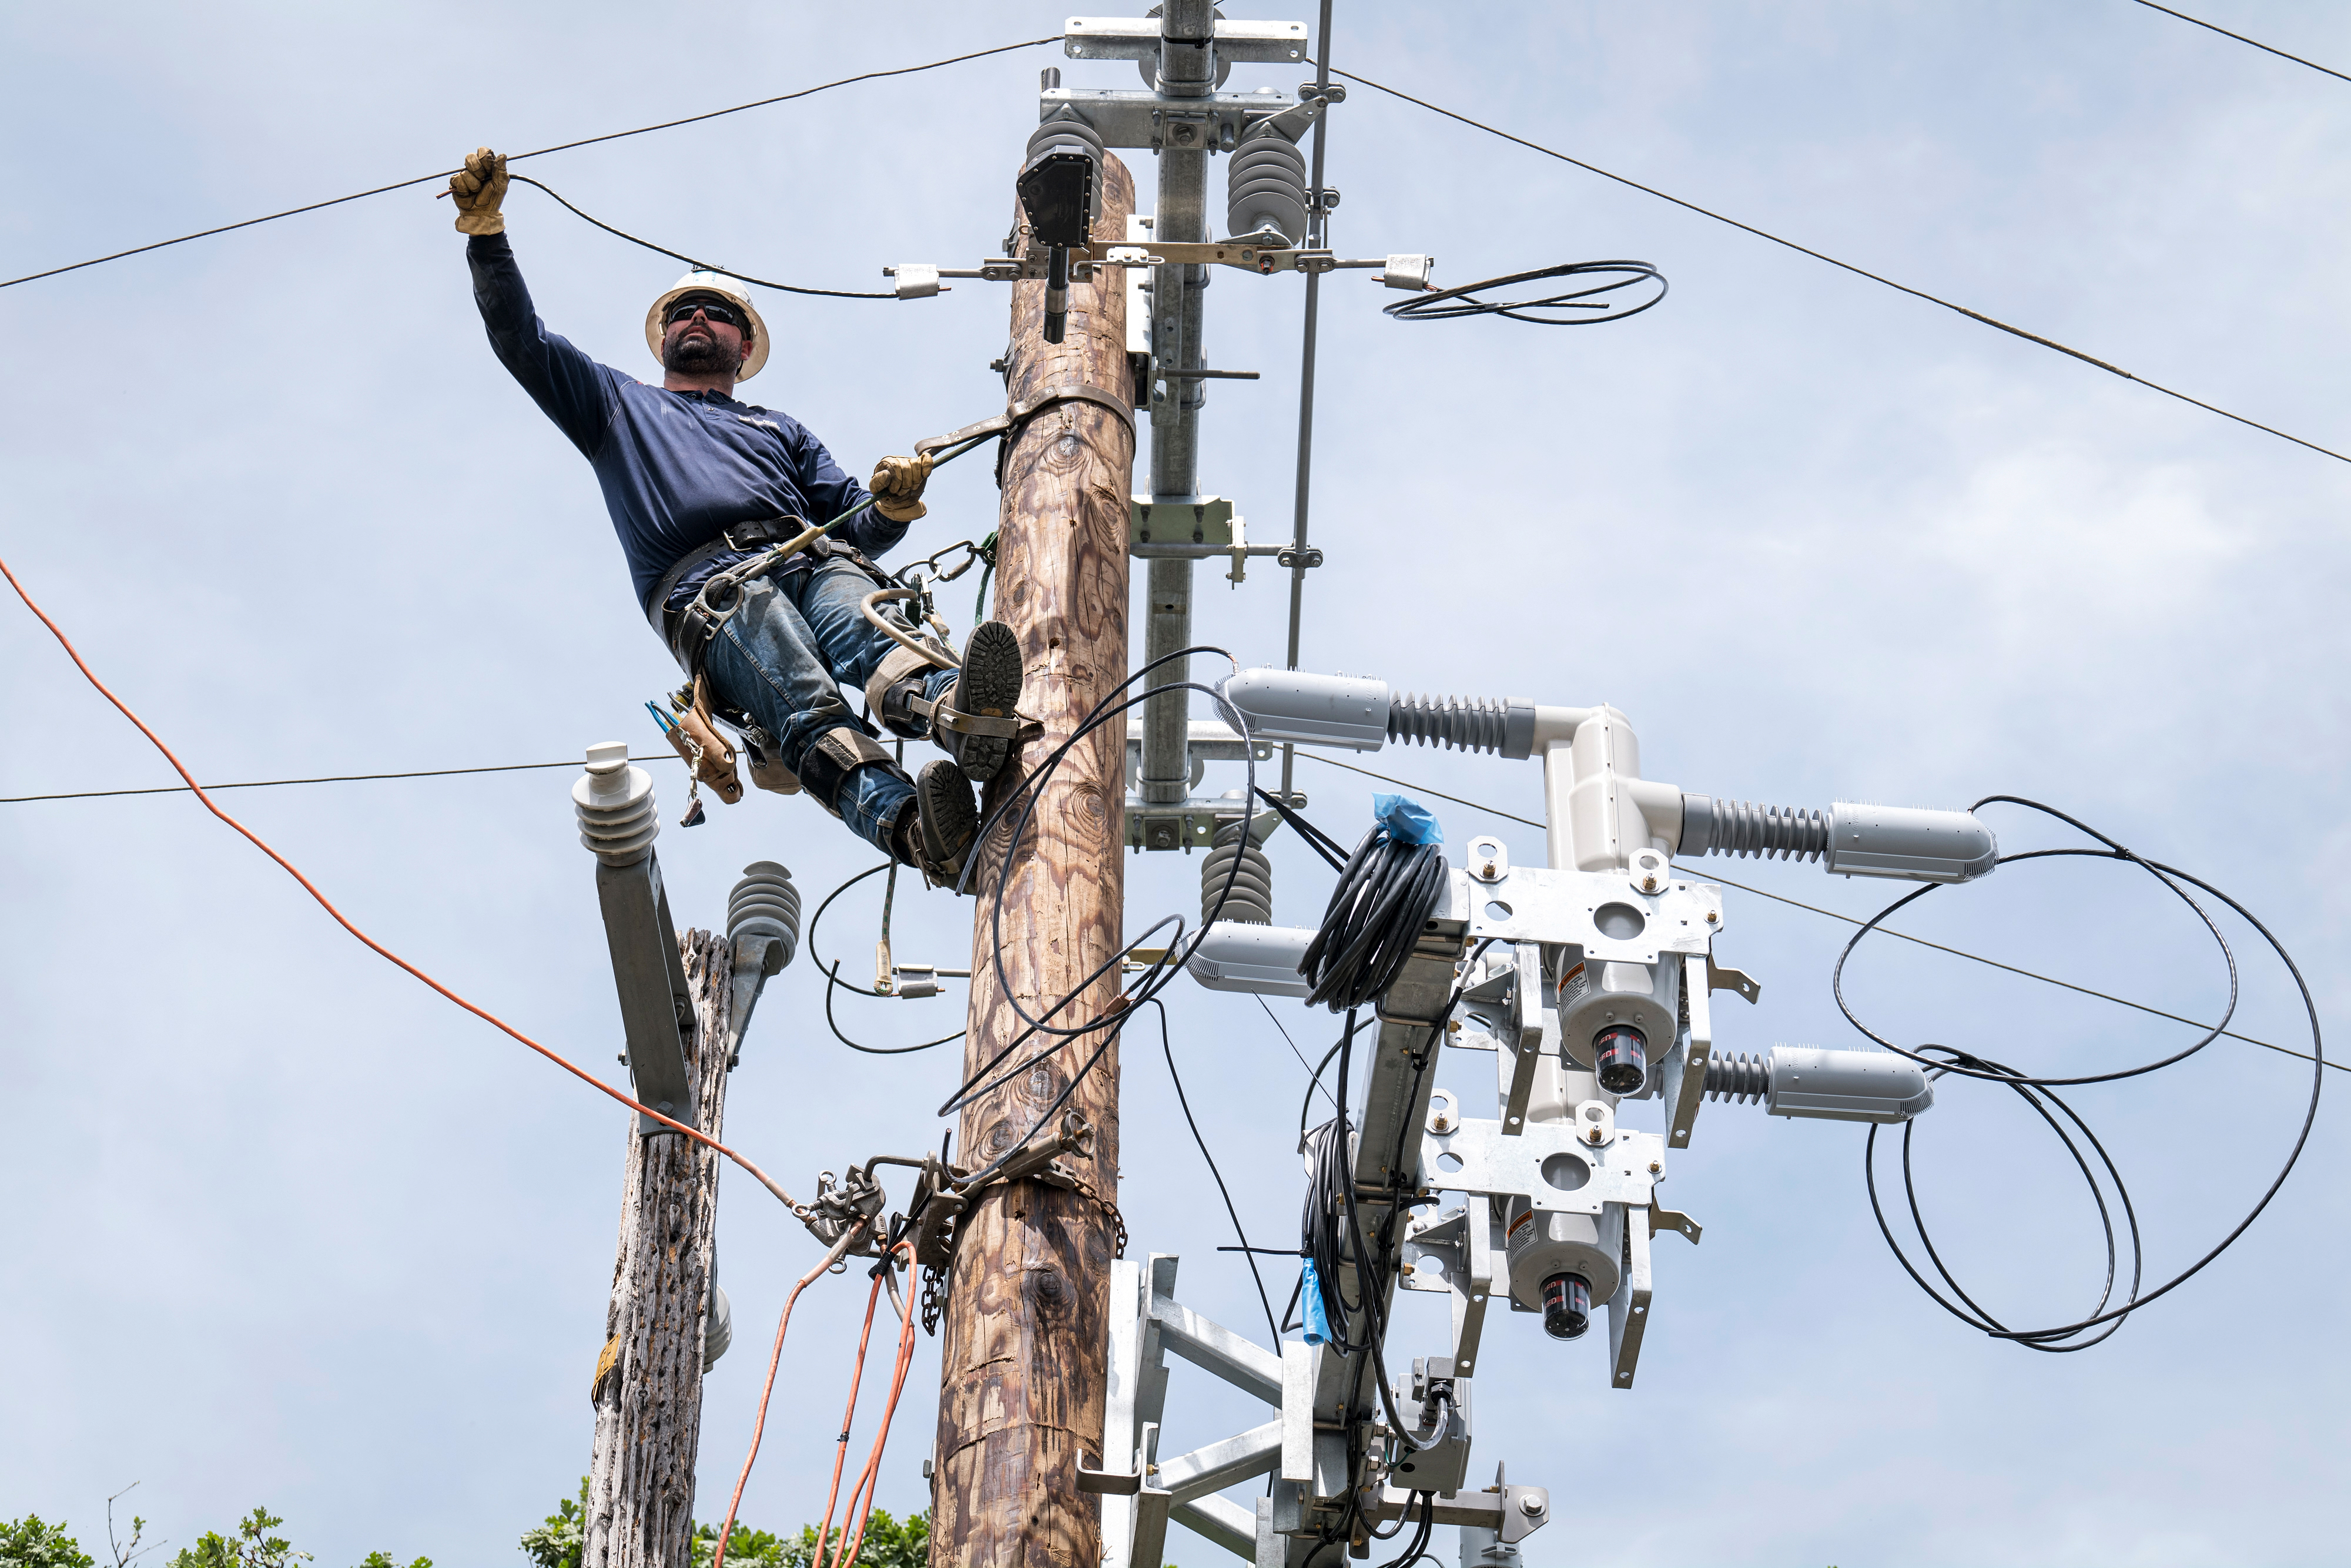 A man in a hardhat is seen at nearly the top of a utility pole, in a harness, a wire in one hand.